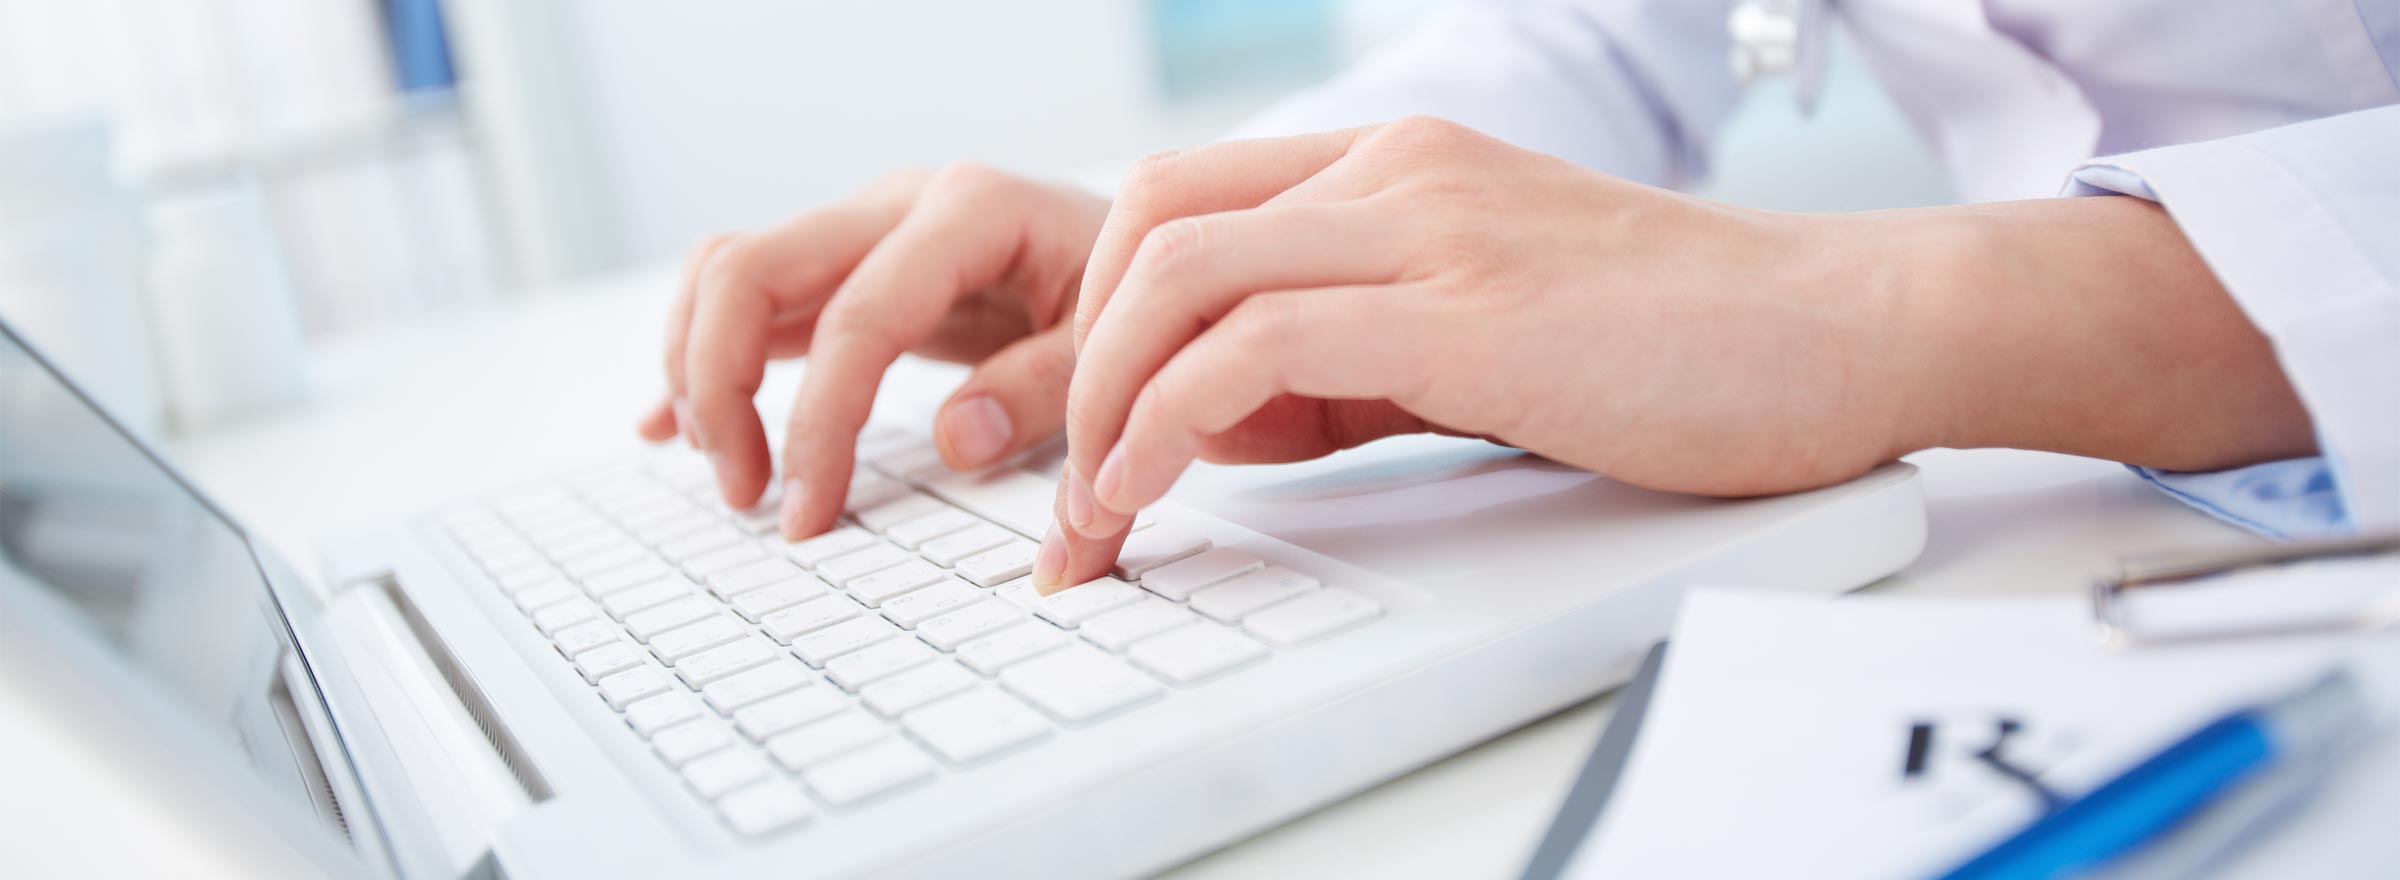 hands of a medical professional typing on a laptop